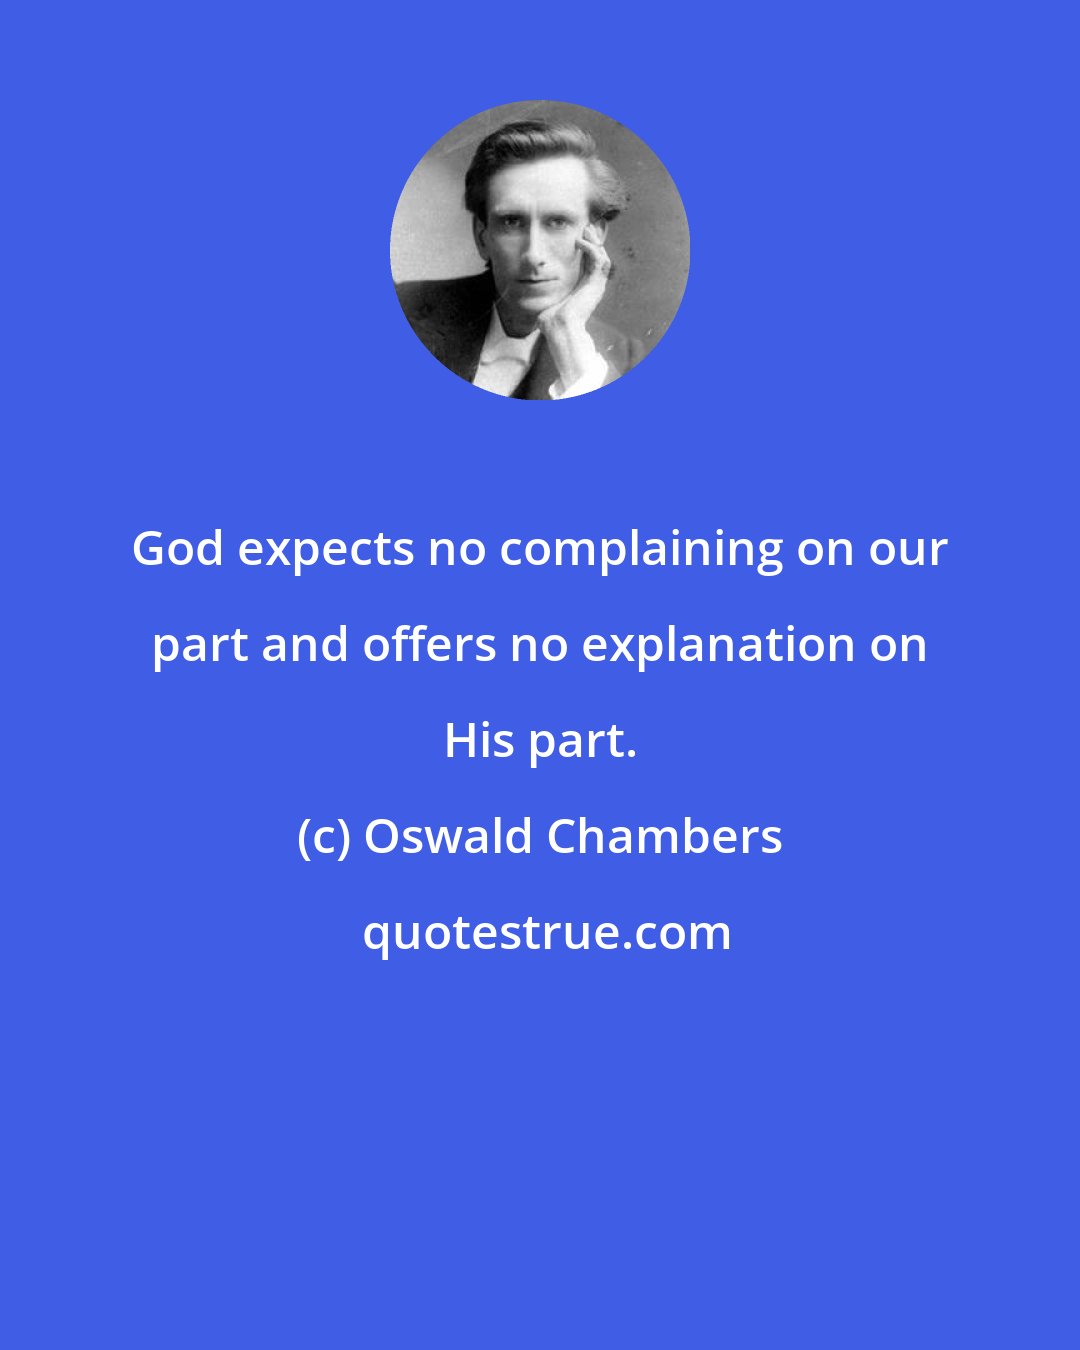 Oswald Chambers: God expects no complaining on our part and offers no explanation on His part.